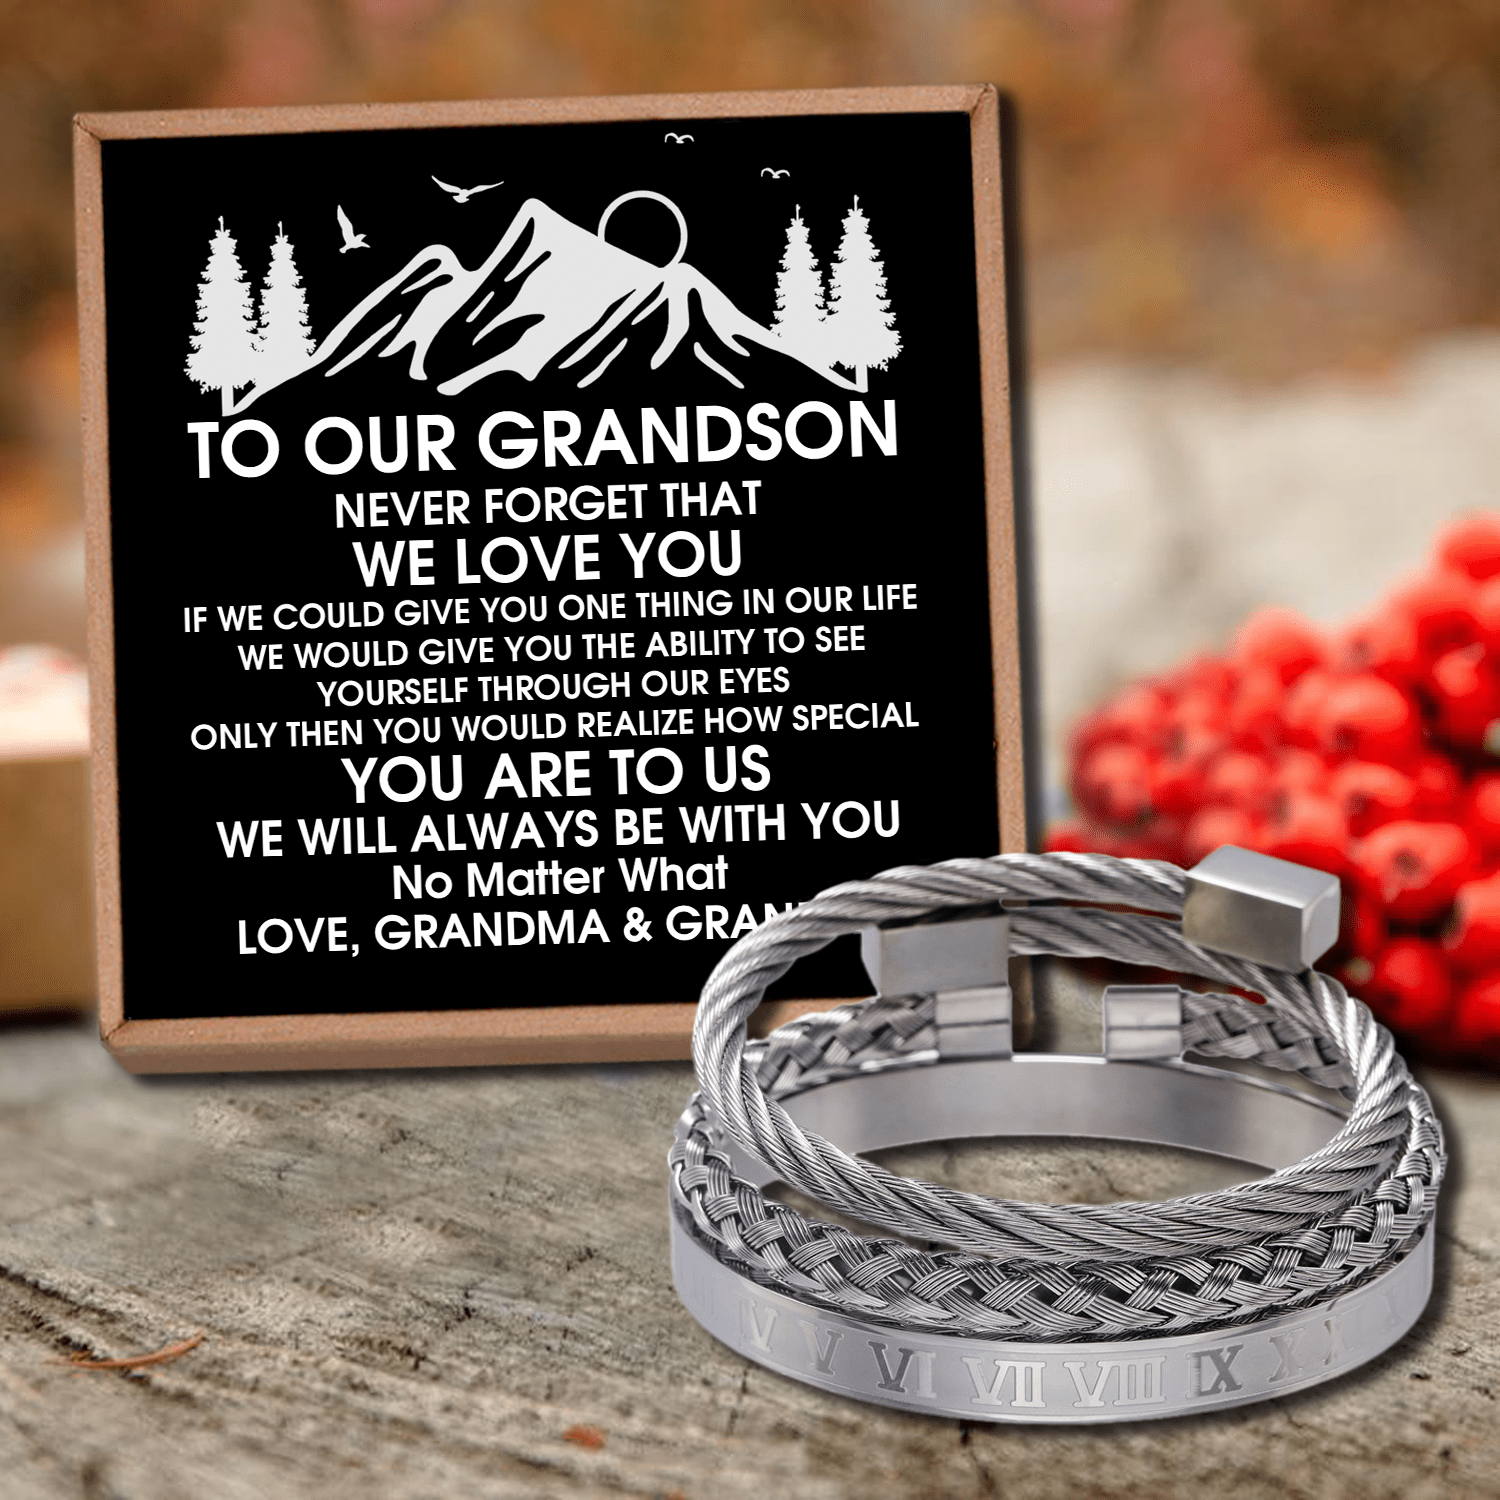 Bracelets To Our Grandson - We Love You Roman Numeral Bracelet Set Silver GiveMe-Gifts